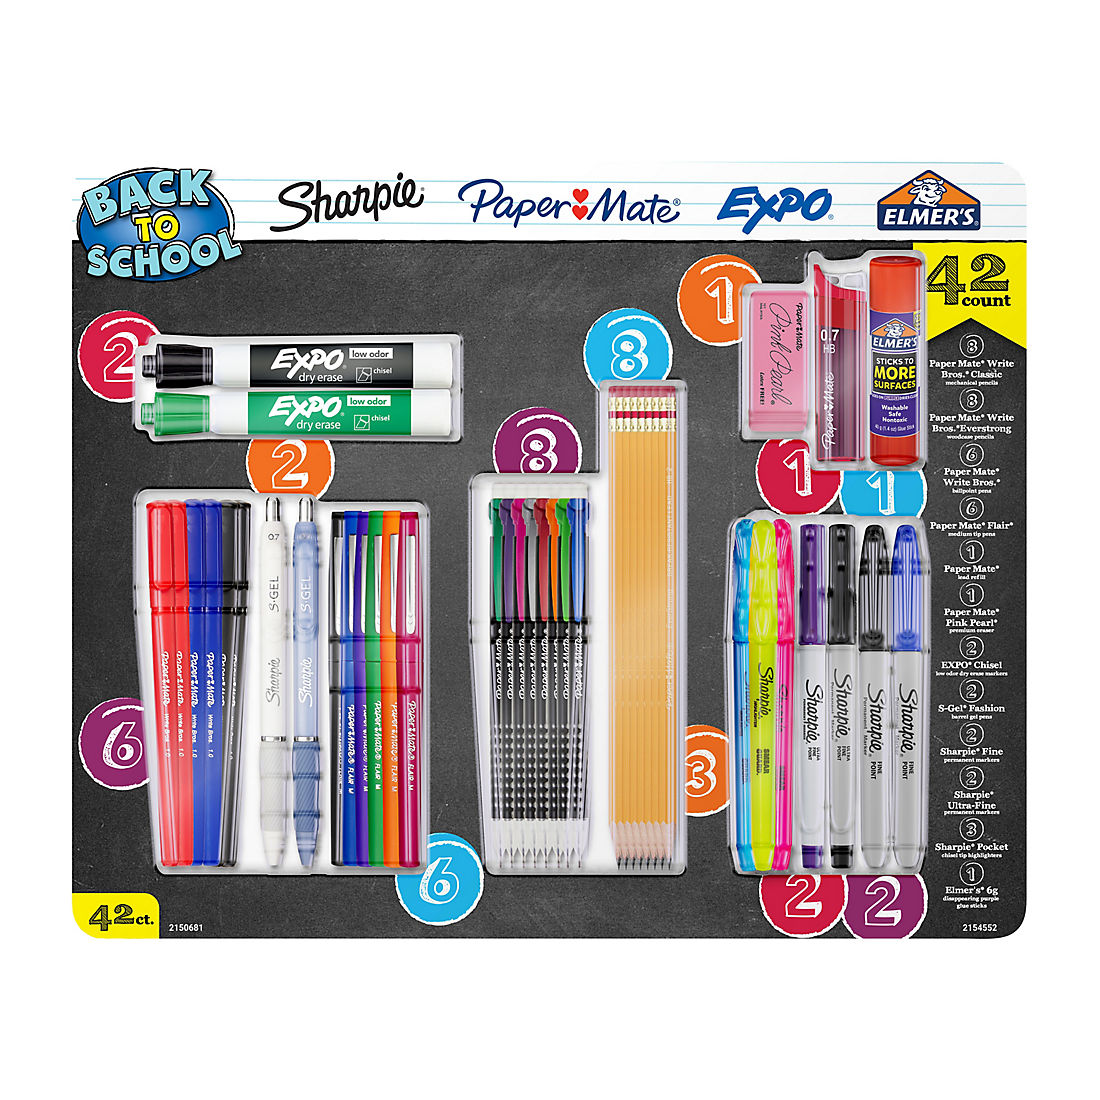 Expo Paper Mate Elmer’s 38 Count School Glue Sharpie Woodcase Pencils Gel Pens School Supplies Variety Pack Permanent Markers Mechanical Pencils and More Glue Sticks Ballpoint Pens 